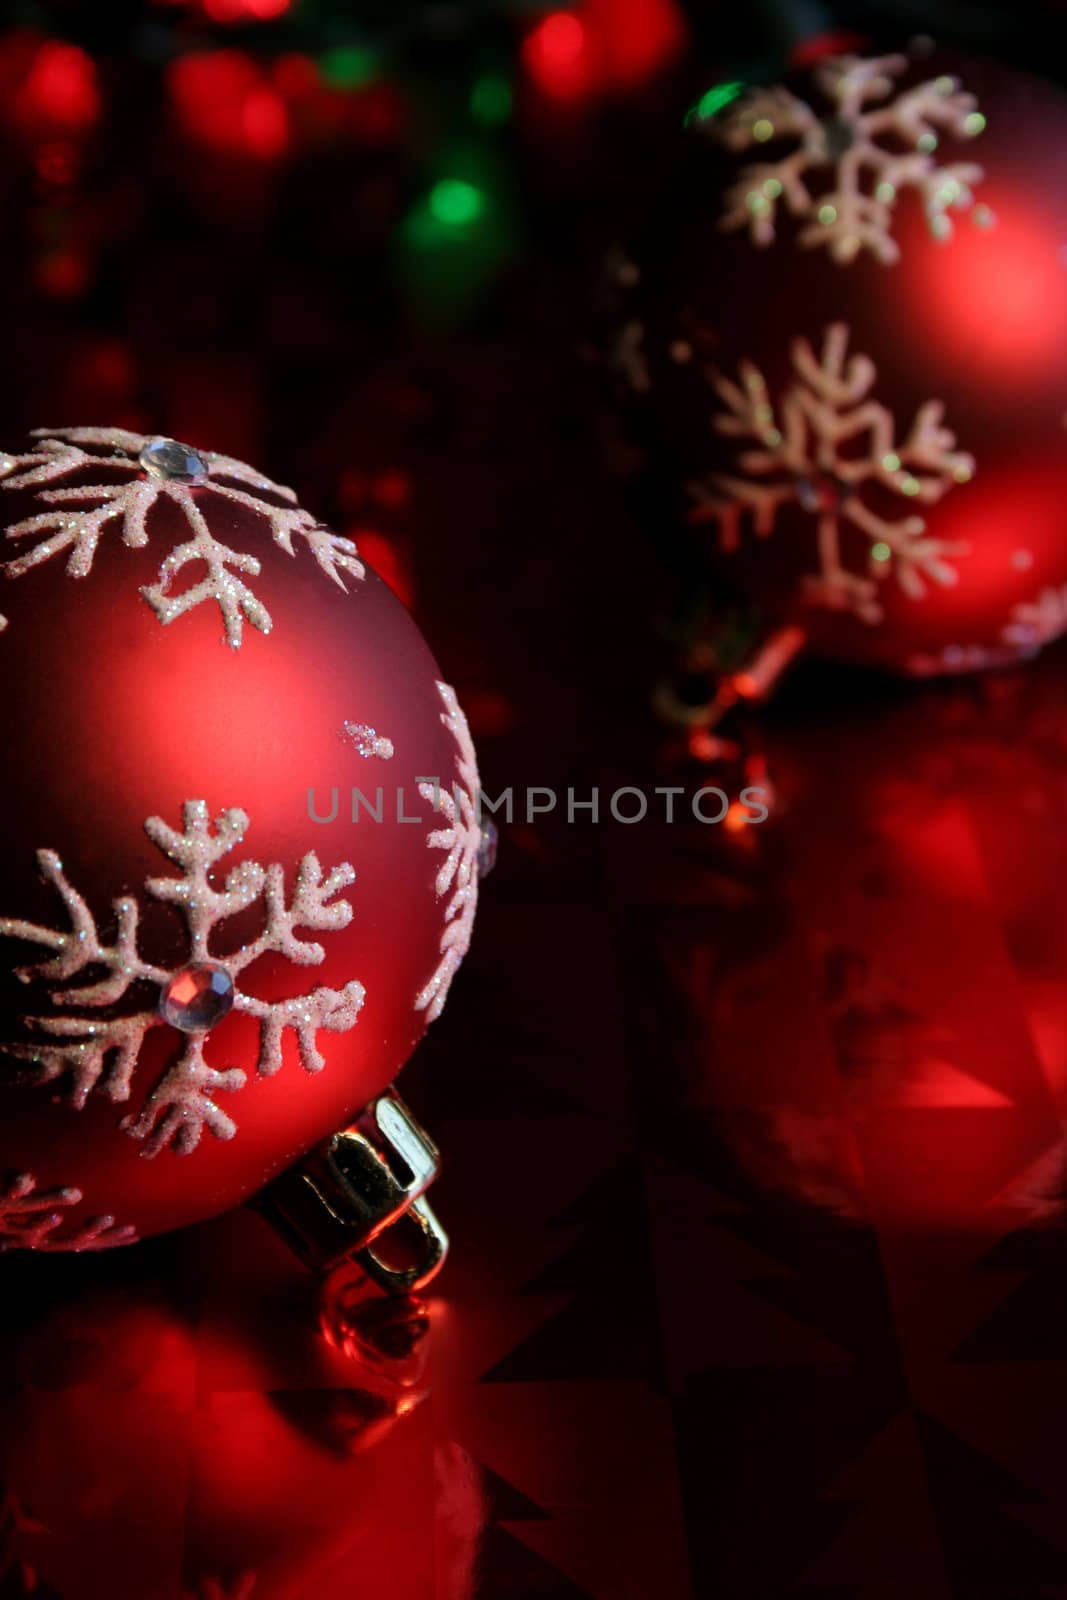 Two red christmas baubles illuminated on glossy red paper.
